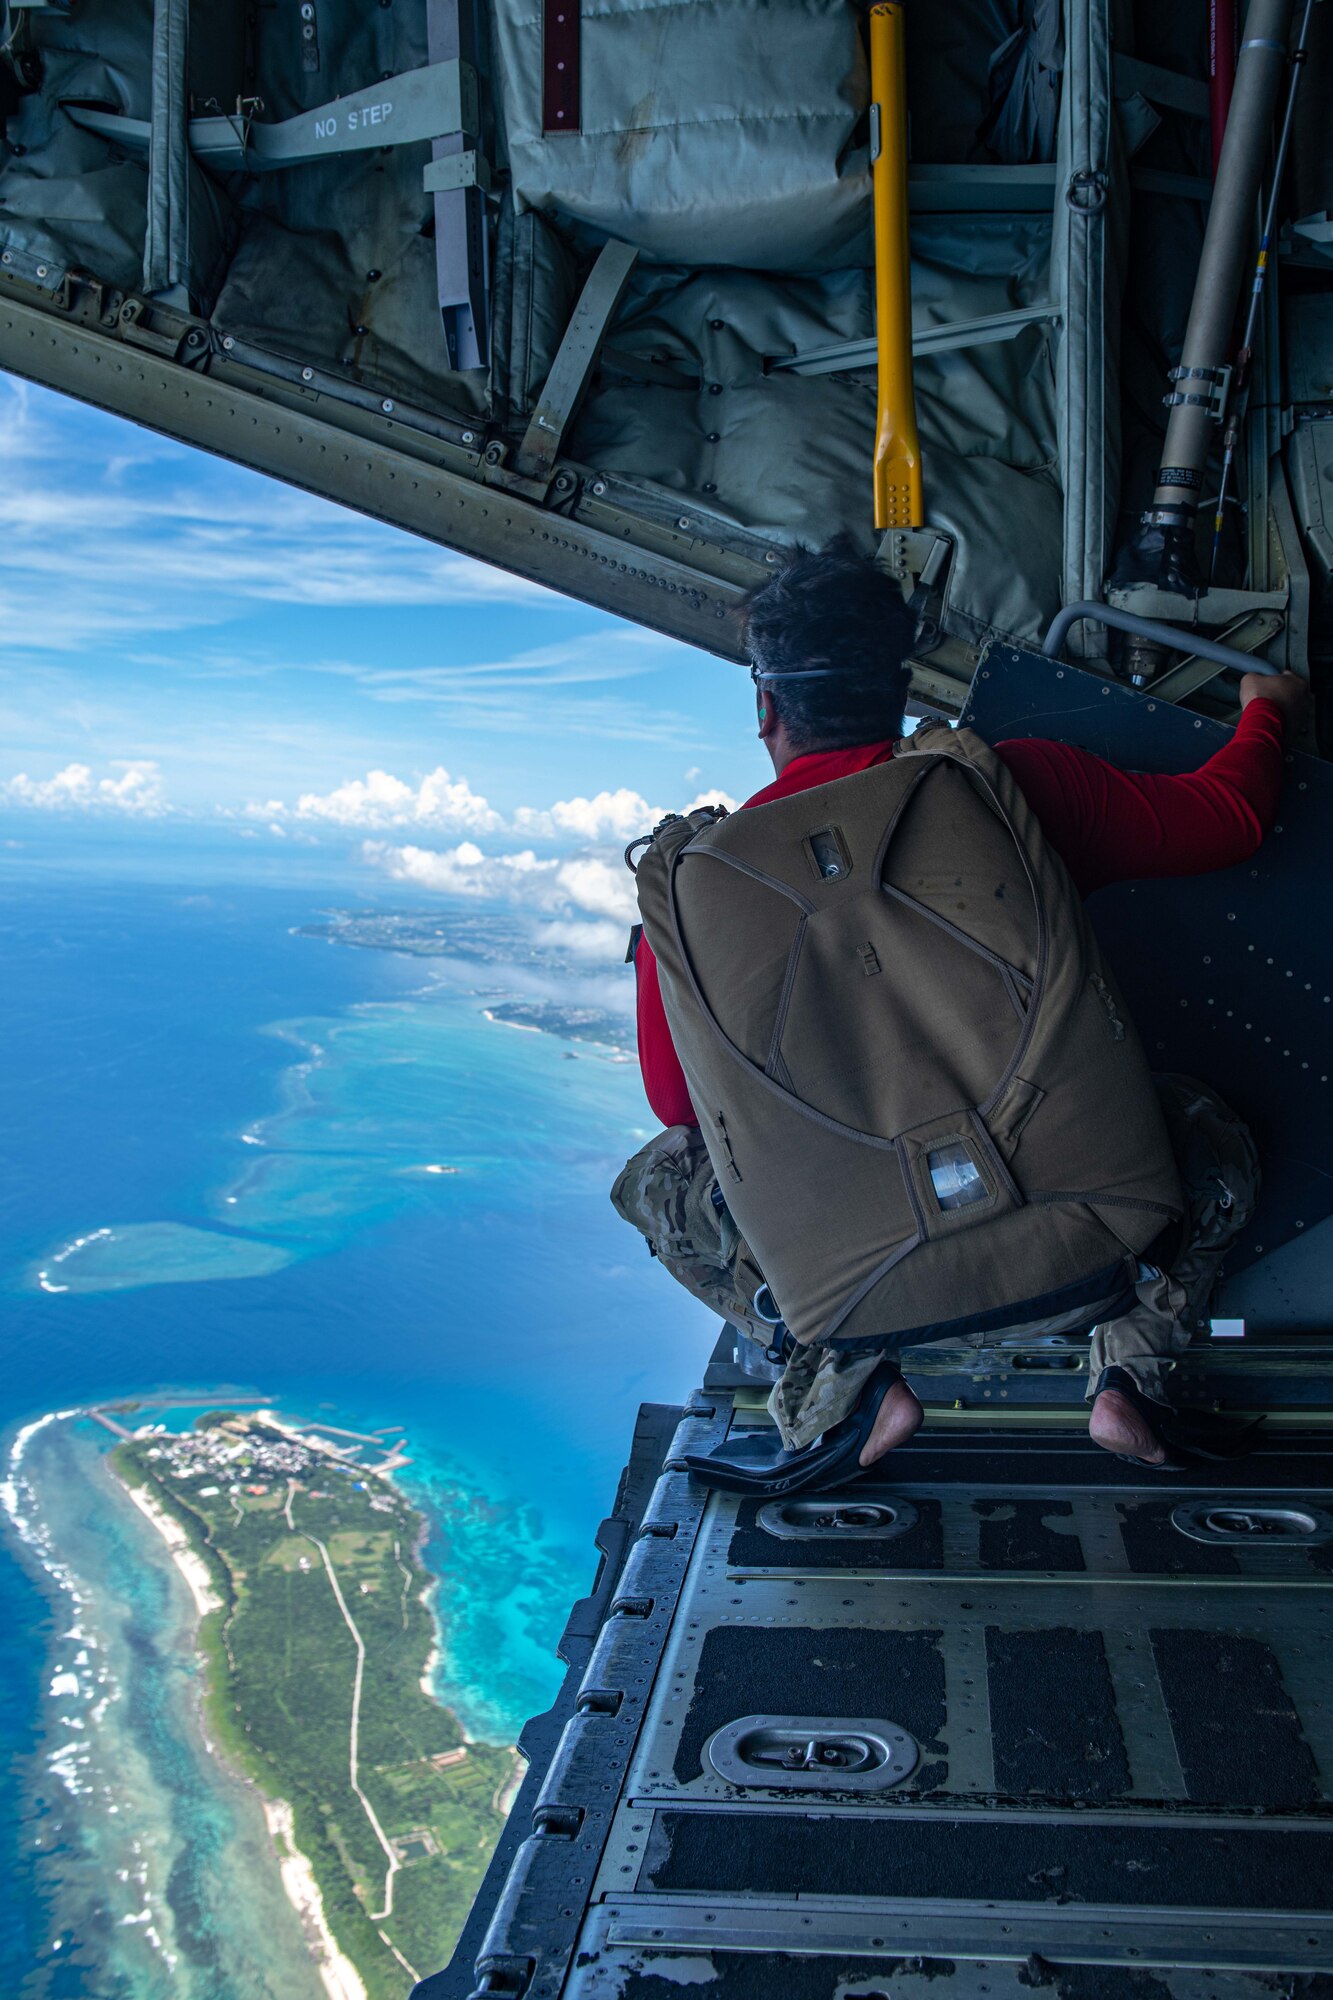 An Airman looks out at an island from the back of a plane